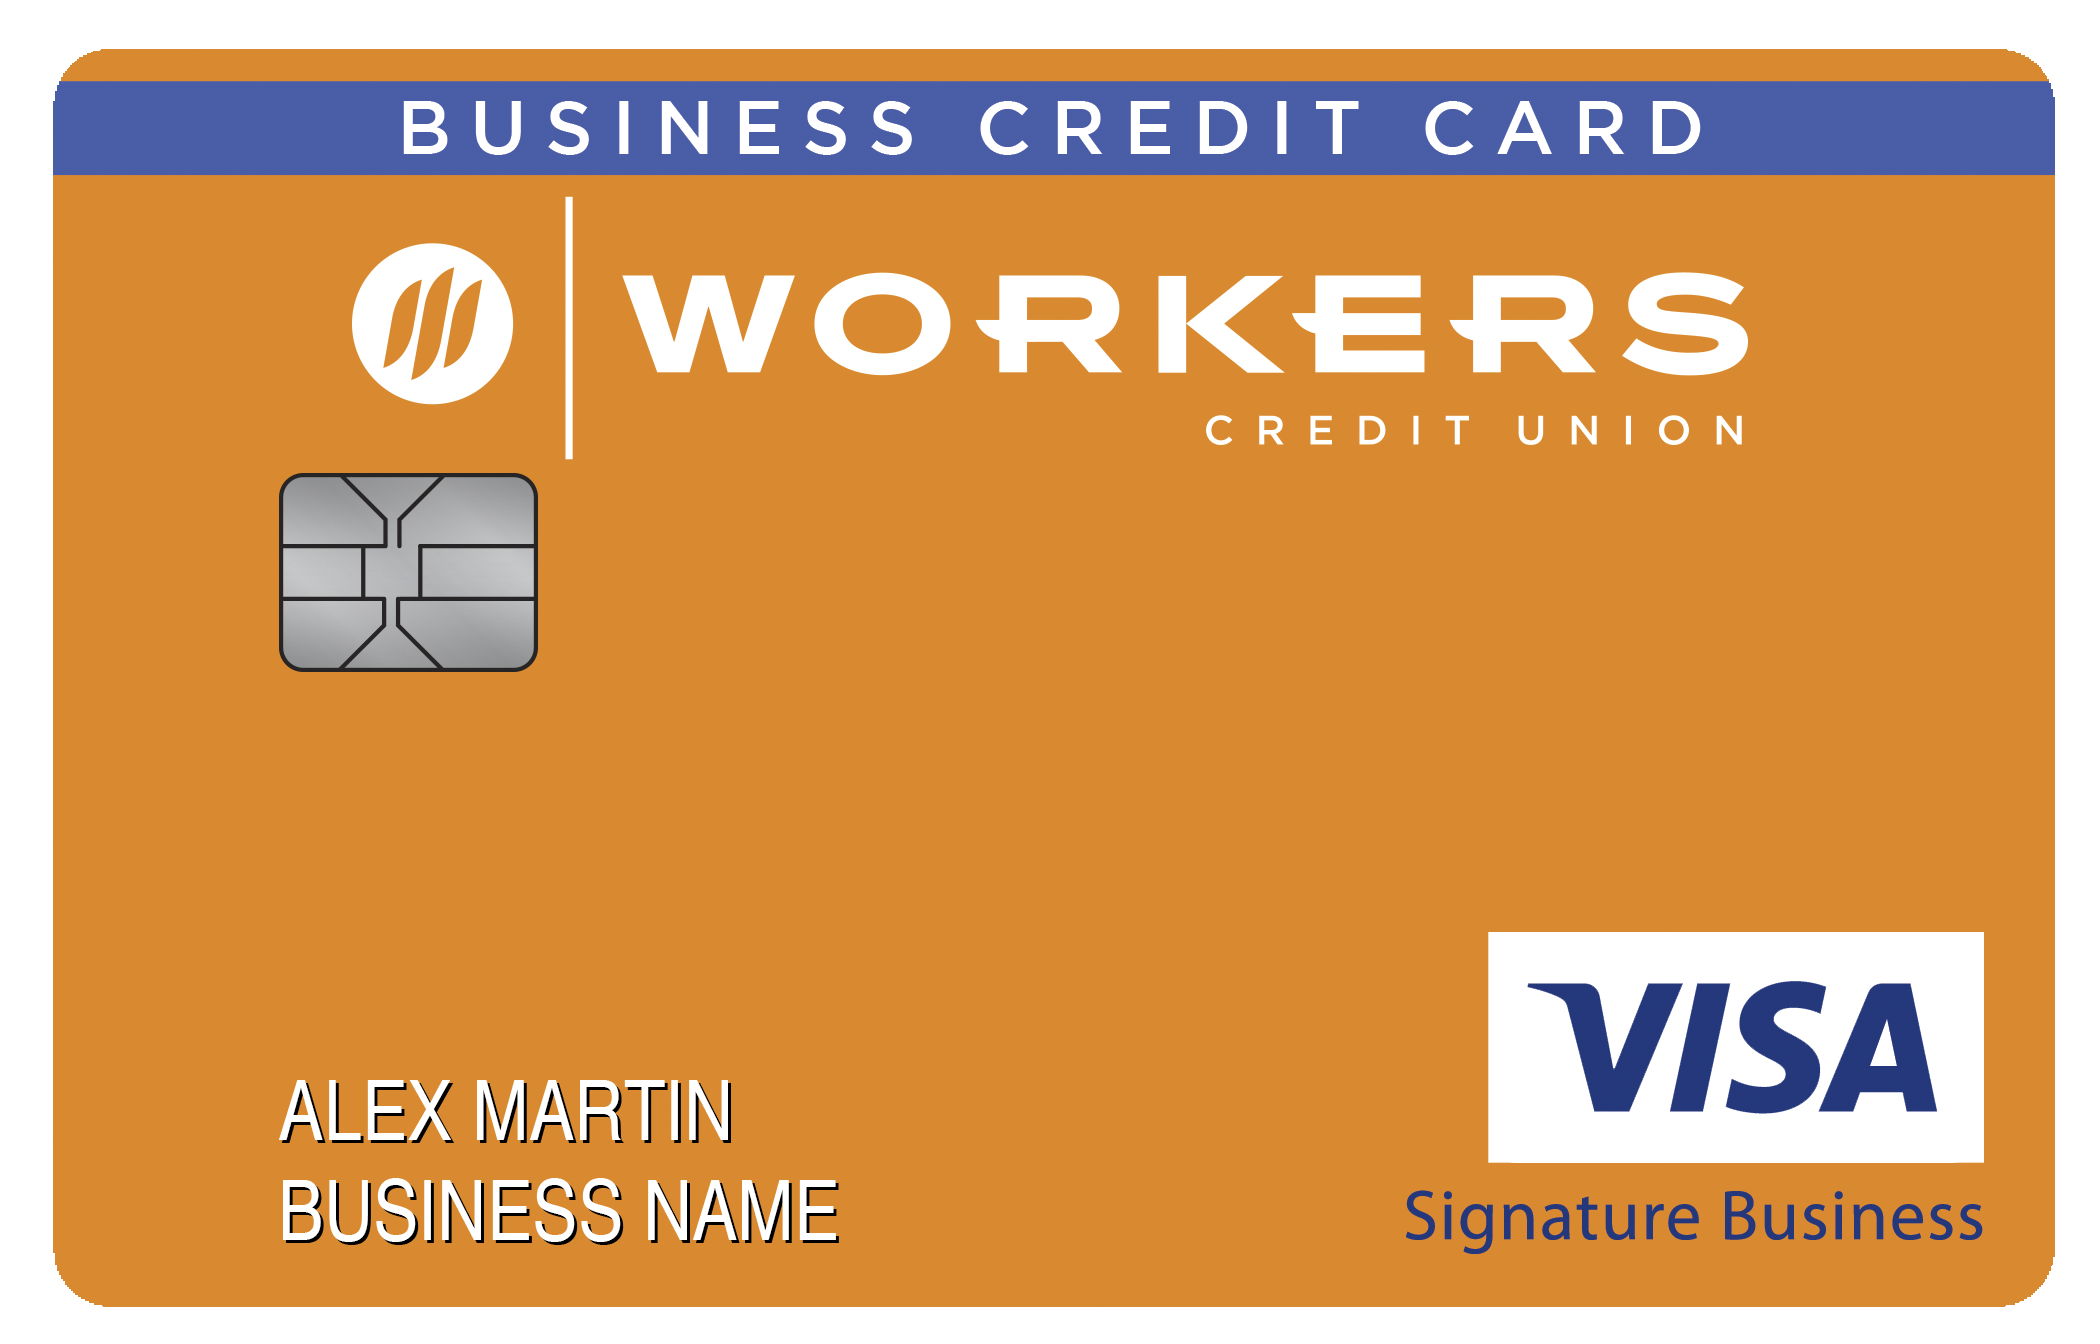 Workers Credit Union Smart Business Rewards Card